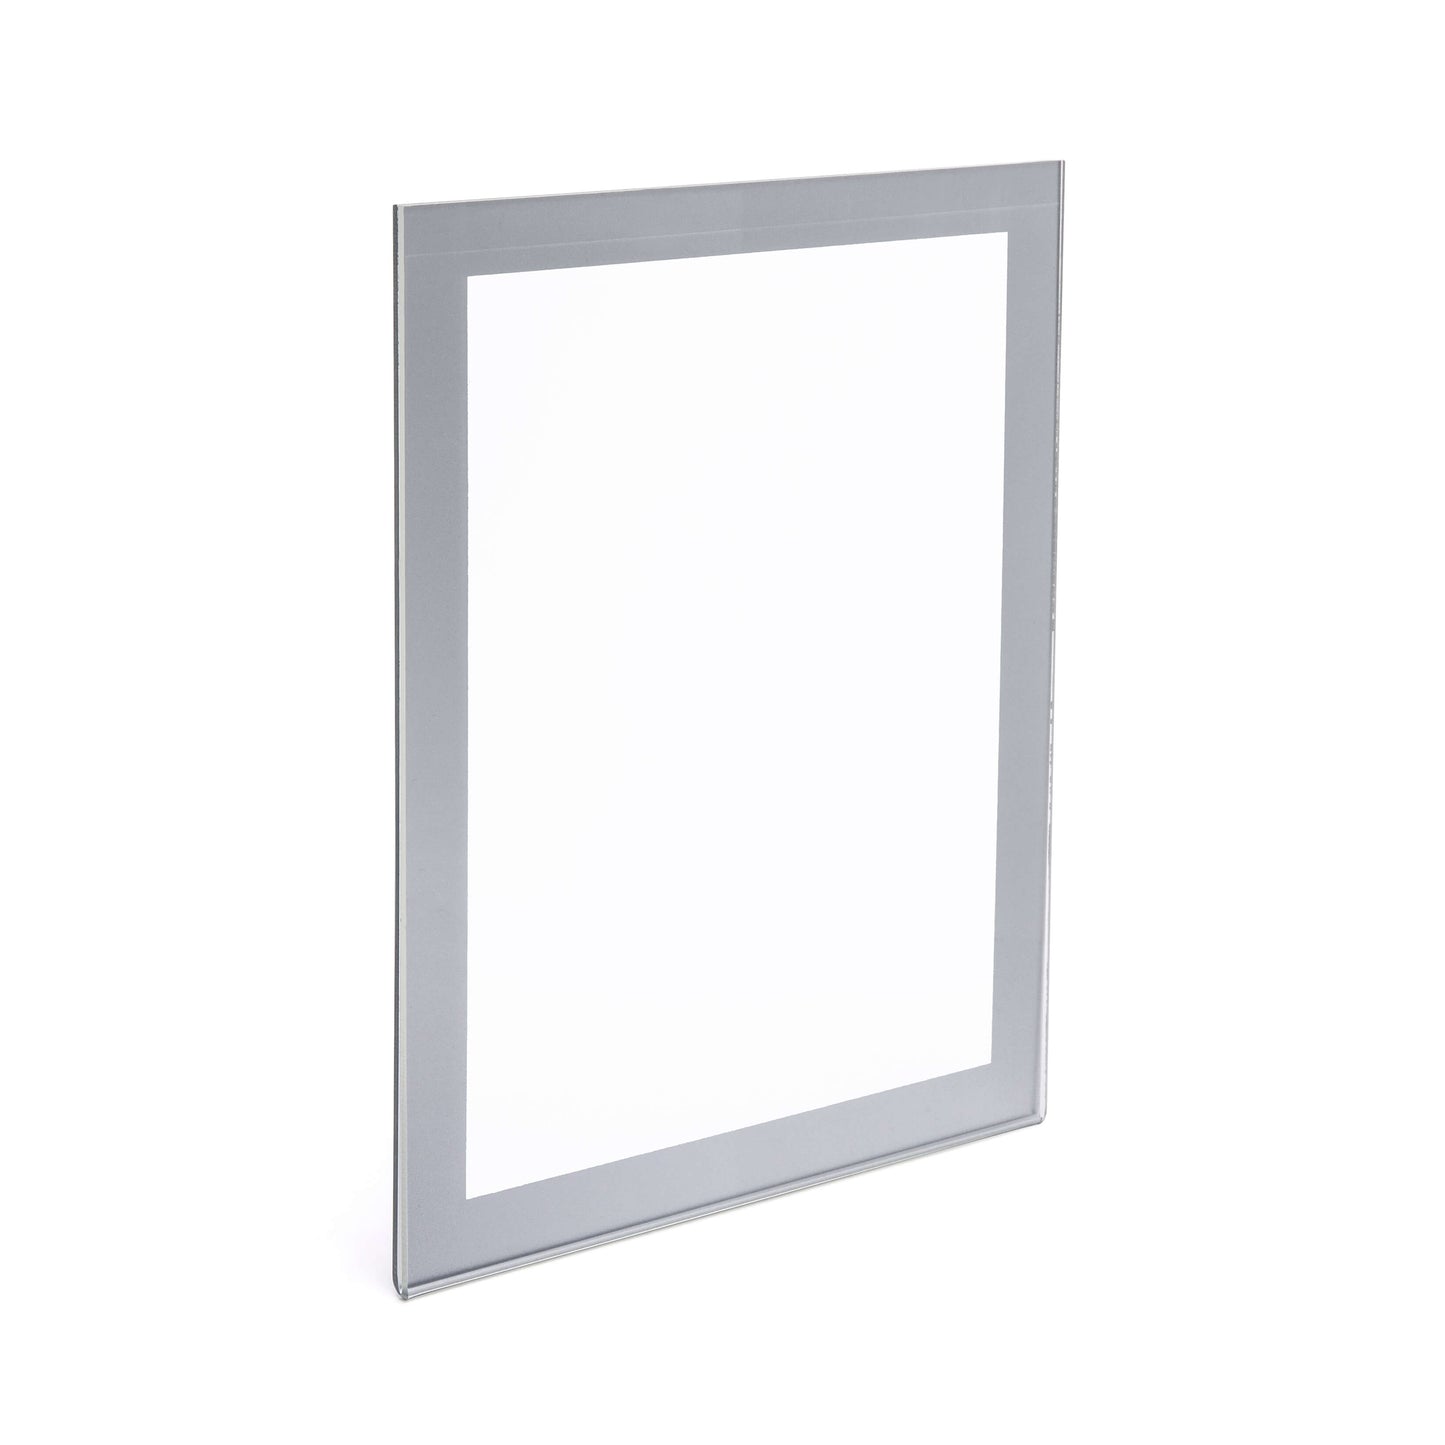 Acrylic Wall Frame with Silver Border